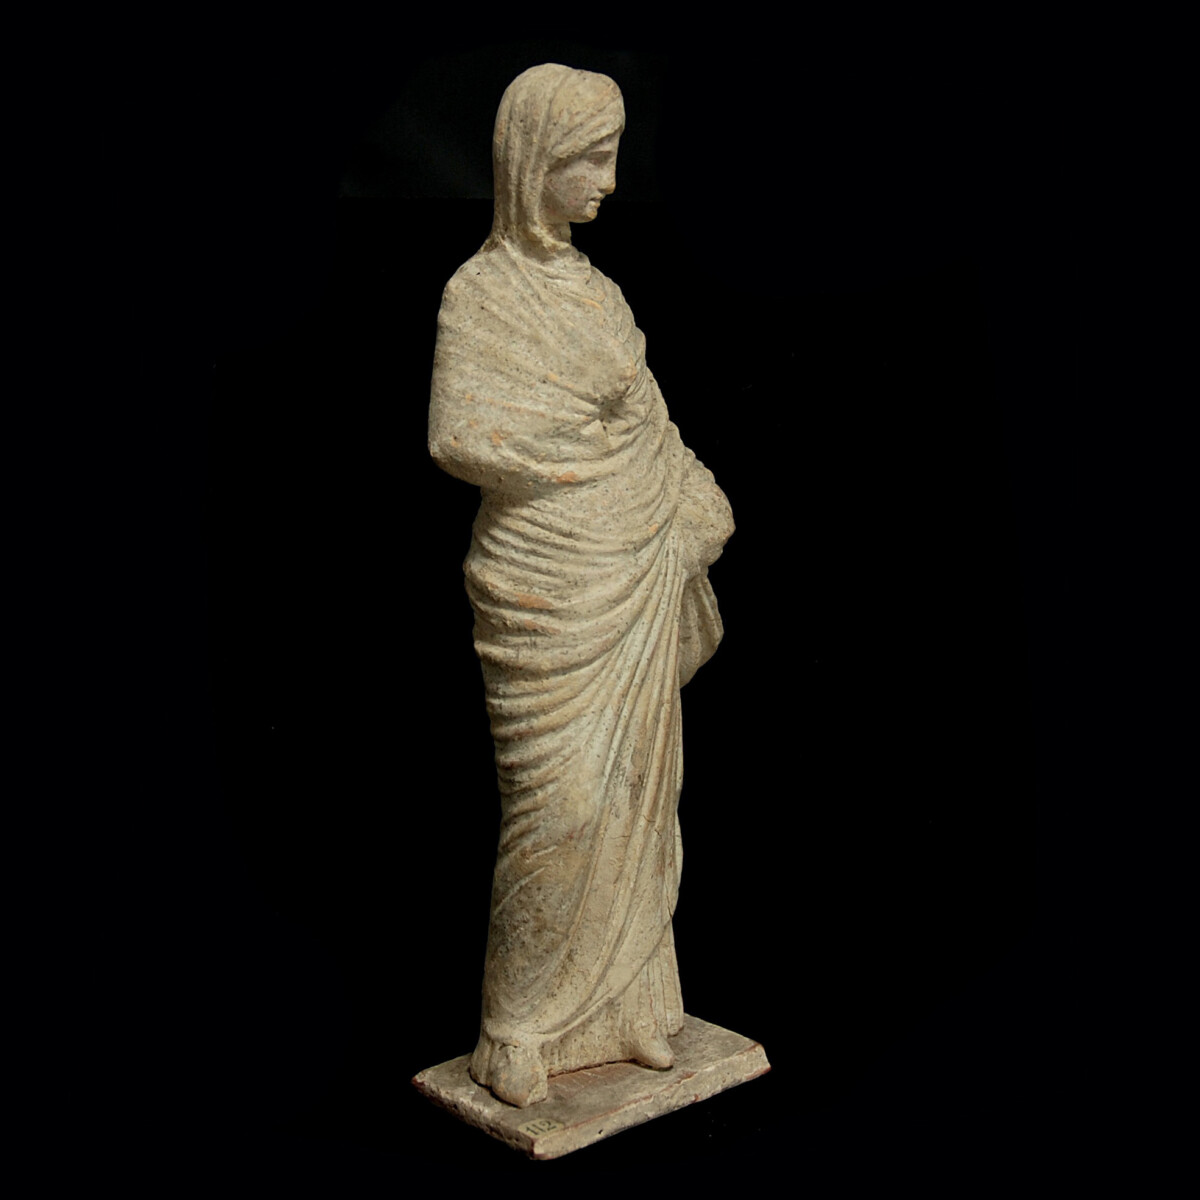 8 Tanagra statuette of a veiled woman right